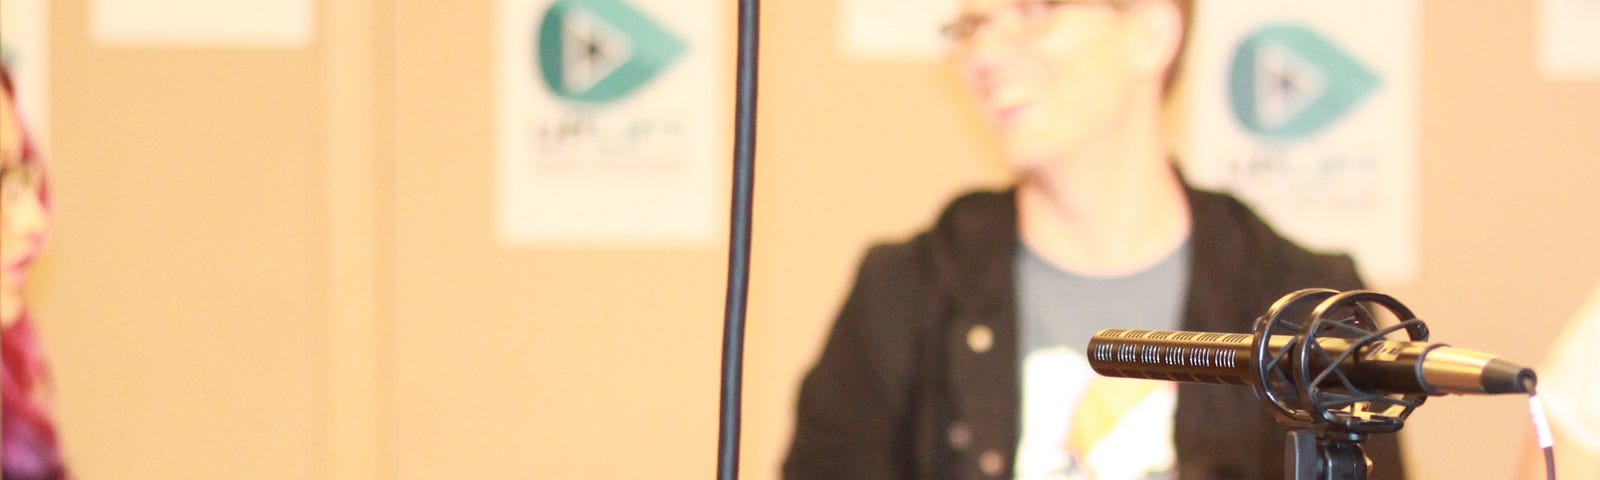 A blurred image of a creator speaking at a panel, with a camera in focus in the foreground.